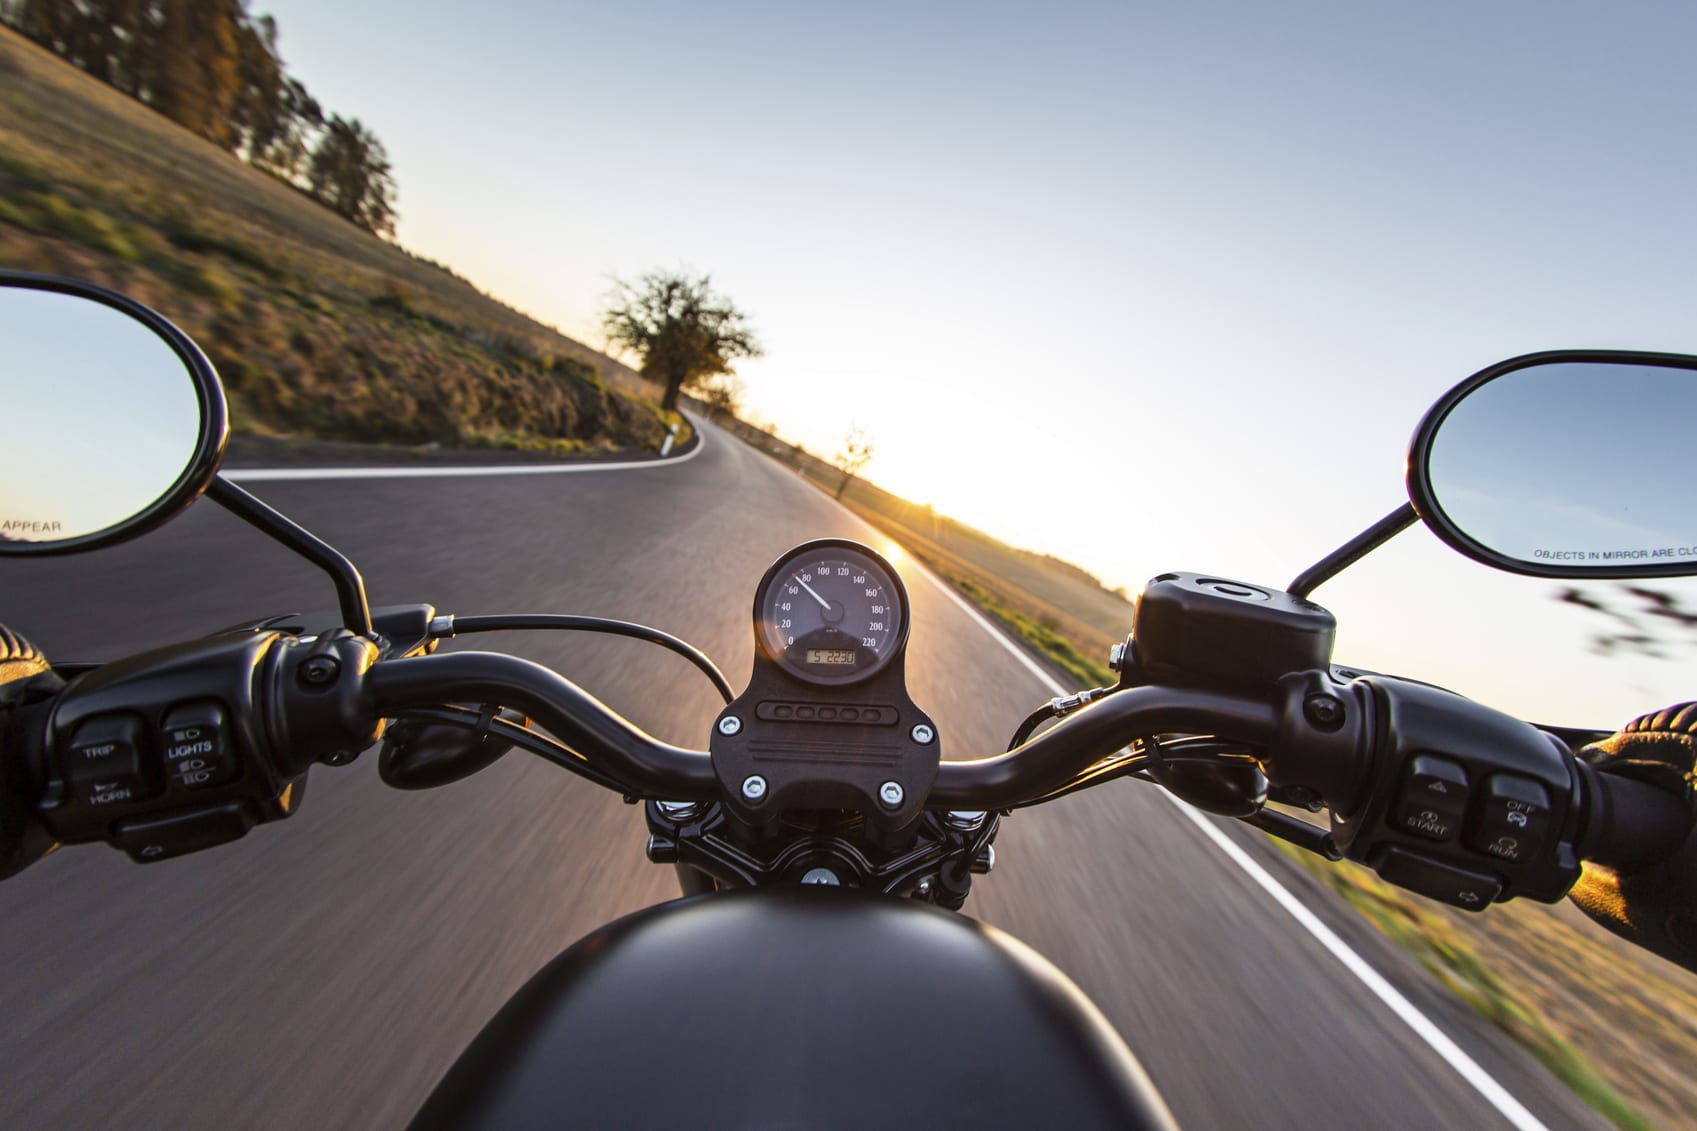 Why Motorcycle Safety Classes are Important